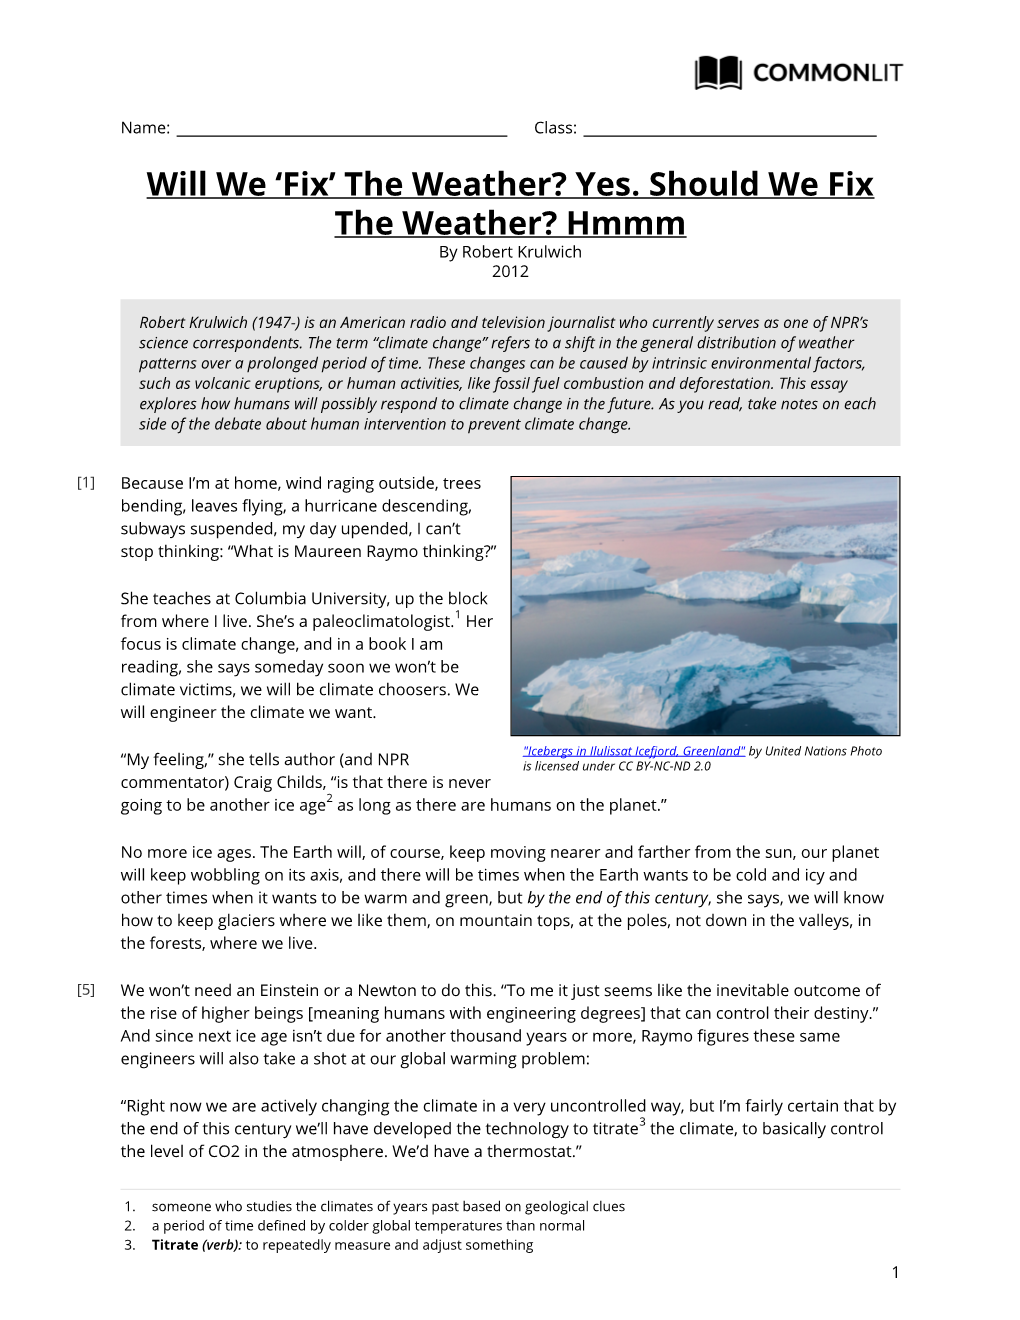 Yes. Should We Fix the Weather? Hmmm by Robert Krulwich 2012